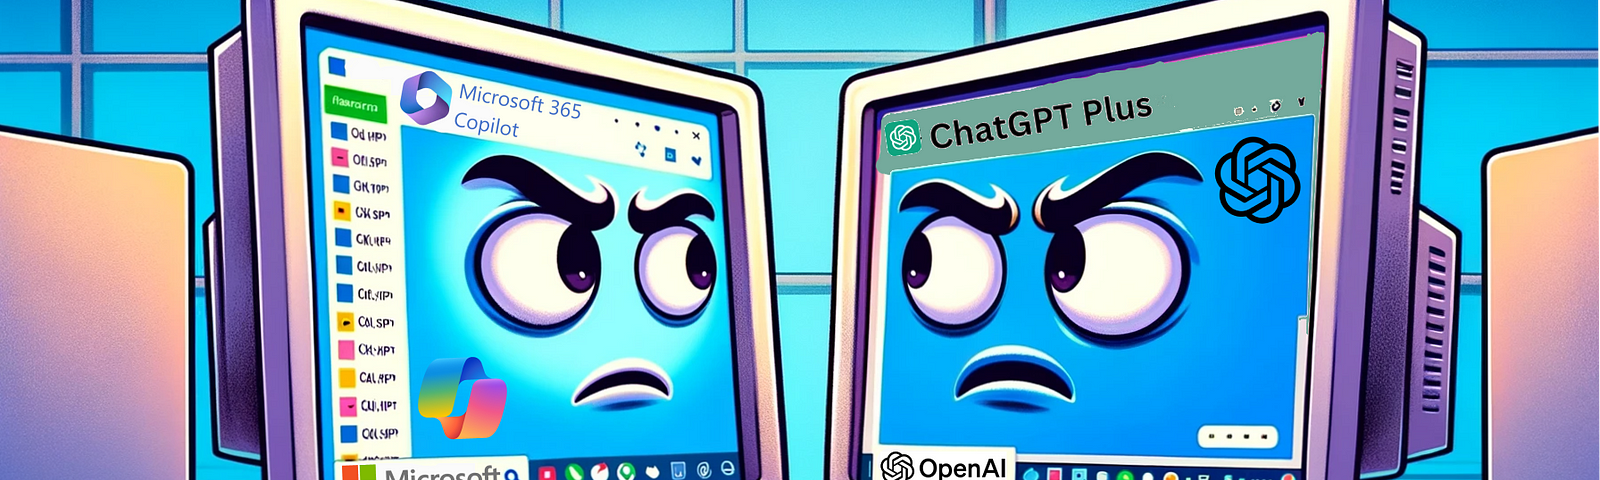 Two computer monitors on a desk, each displaying a facial expression of annoyance or frustration. The monitor on the left displays a start menu with the label “Microsoft 365 Copilot”, while the monitor on the right has a browser window open with tabs, one of which is labeled “ChatGPT Plus” and features the OpenAI logo. The setting suggests an office environment, and the background reveals a blue tiled wall, implying an indoor setting without any visible Windows.